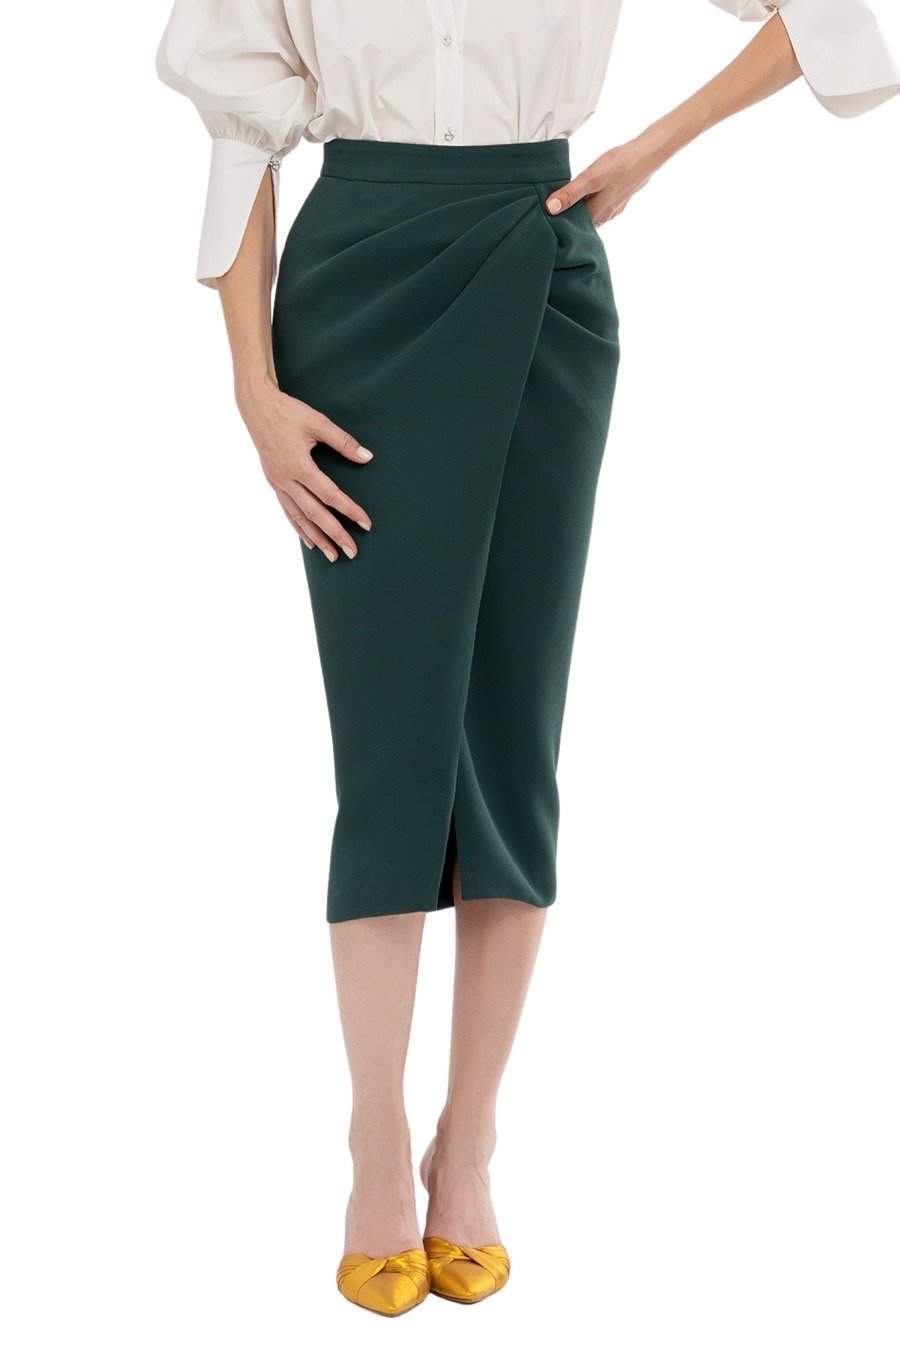 Office Green Stretchy Skirt-danddclothing-AFRICAN WEAR FOR WOMEN,Skirts,White